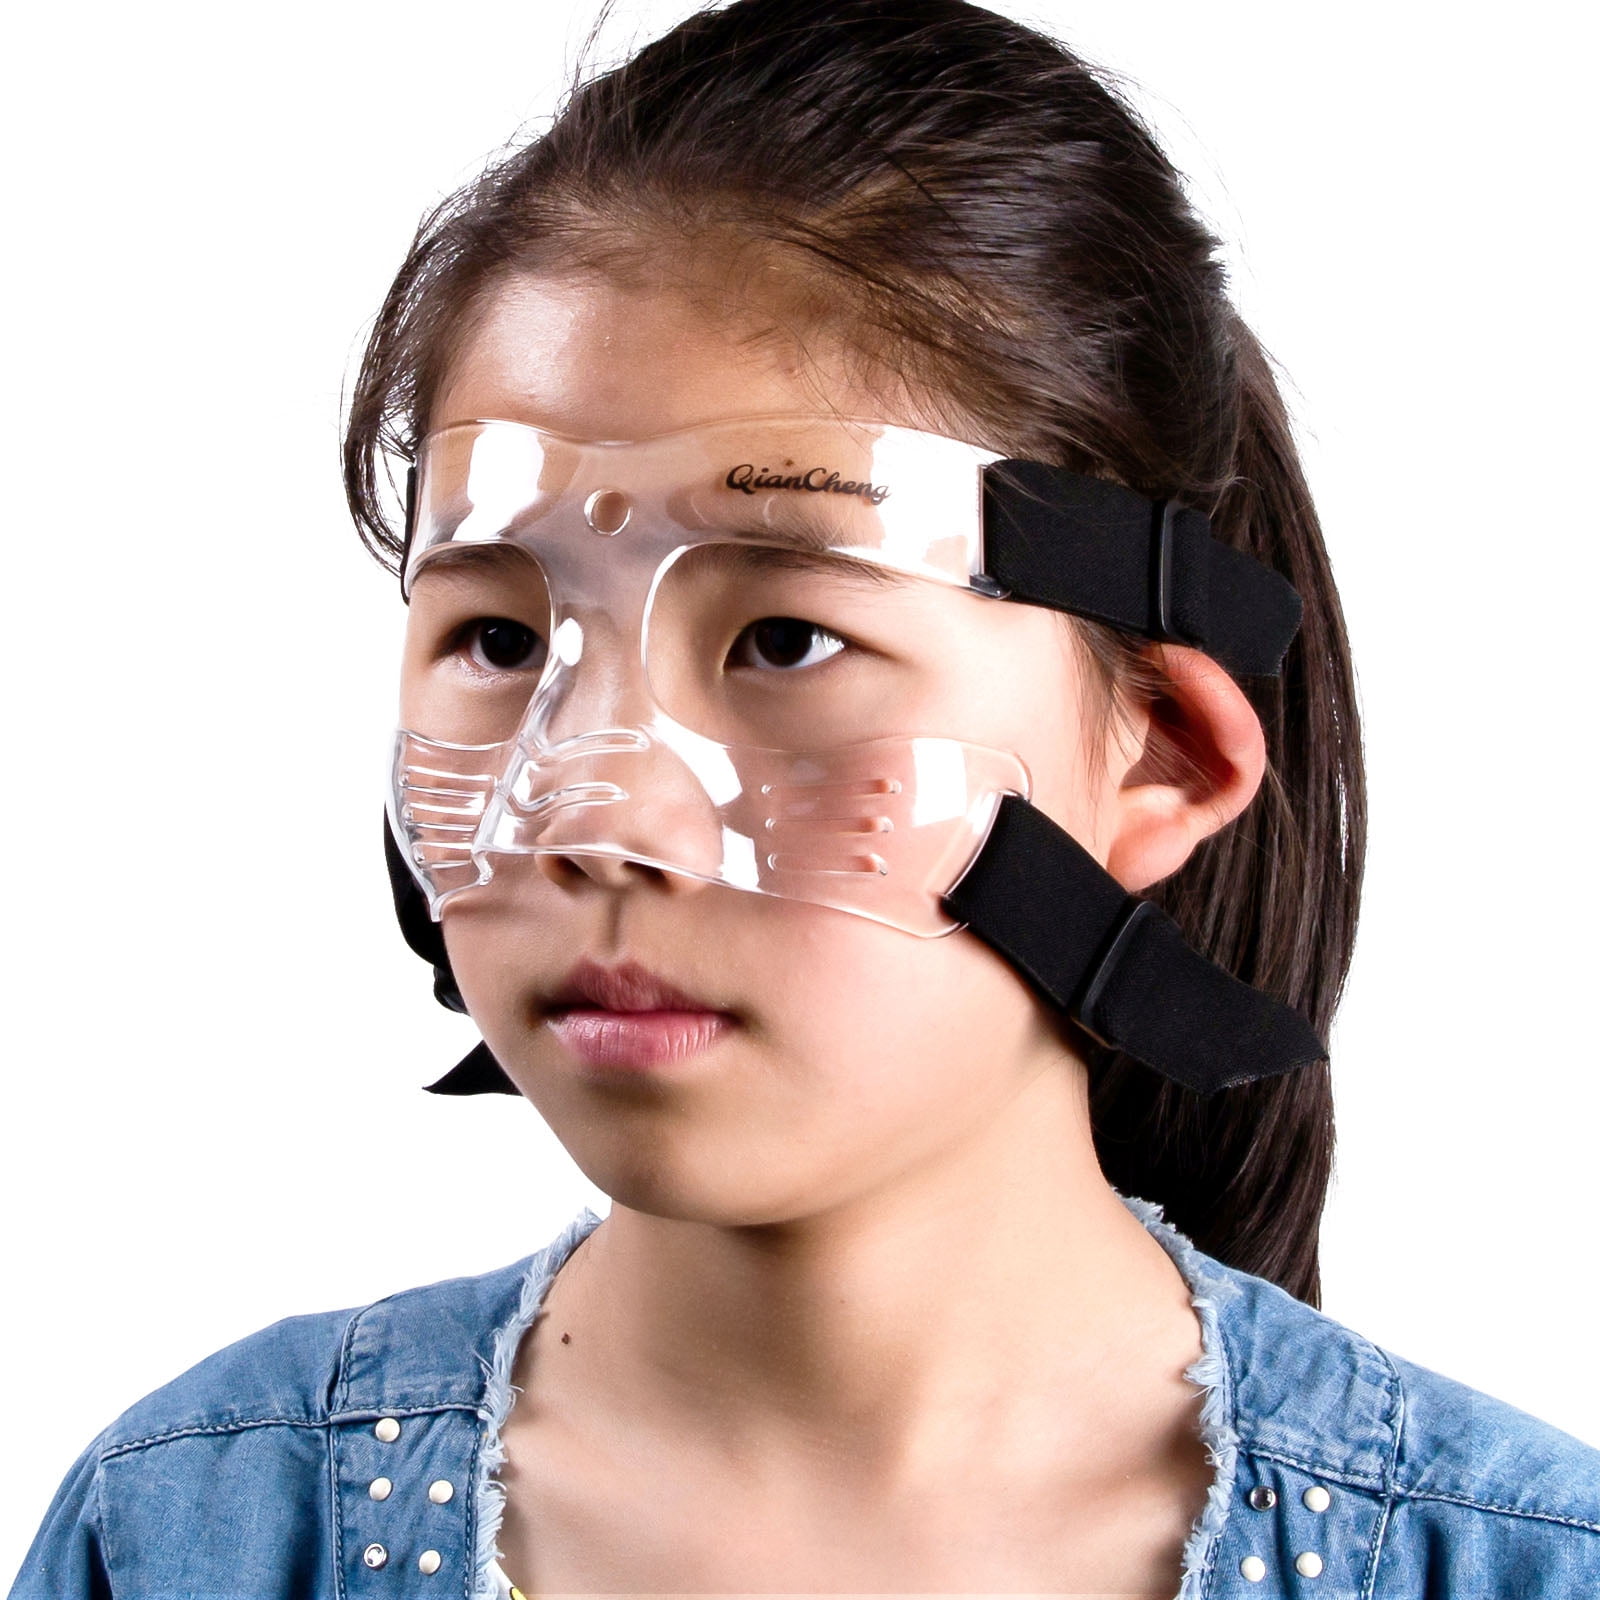 Qiancheng Nose Guard Face Shield for Broken Nose, Adjustable Carbon Fiber  Face Guard with Padding, Protection from Impact Injuries to Nose and Face